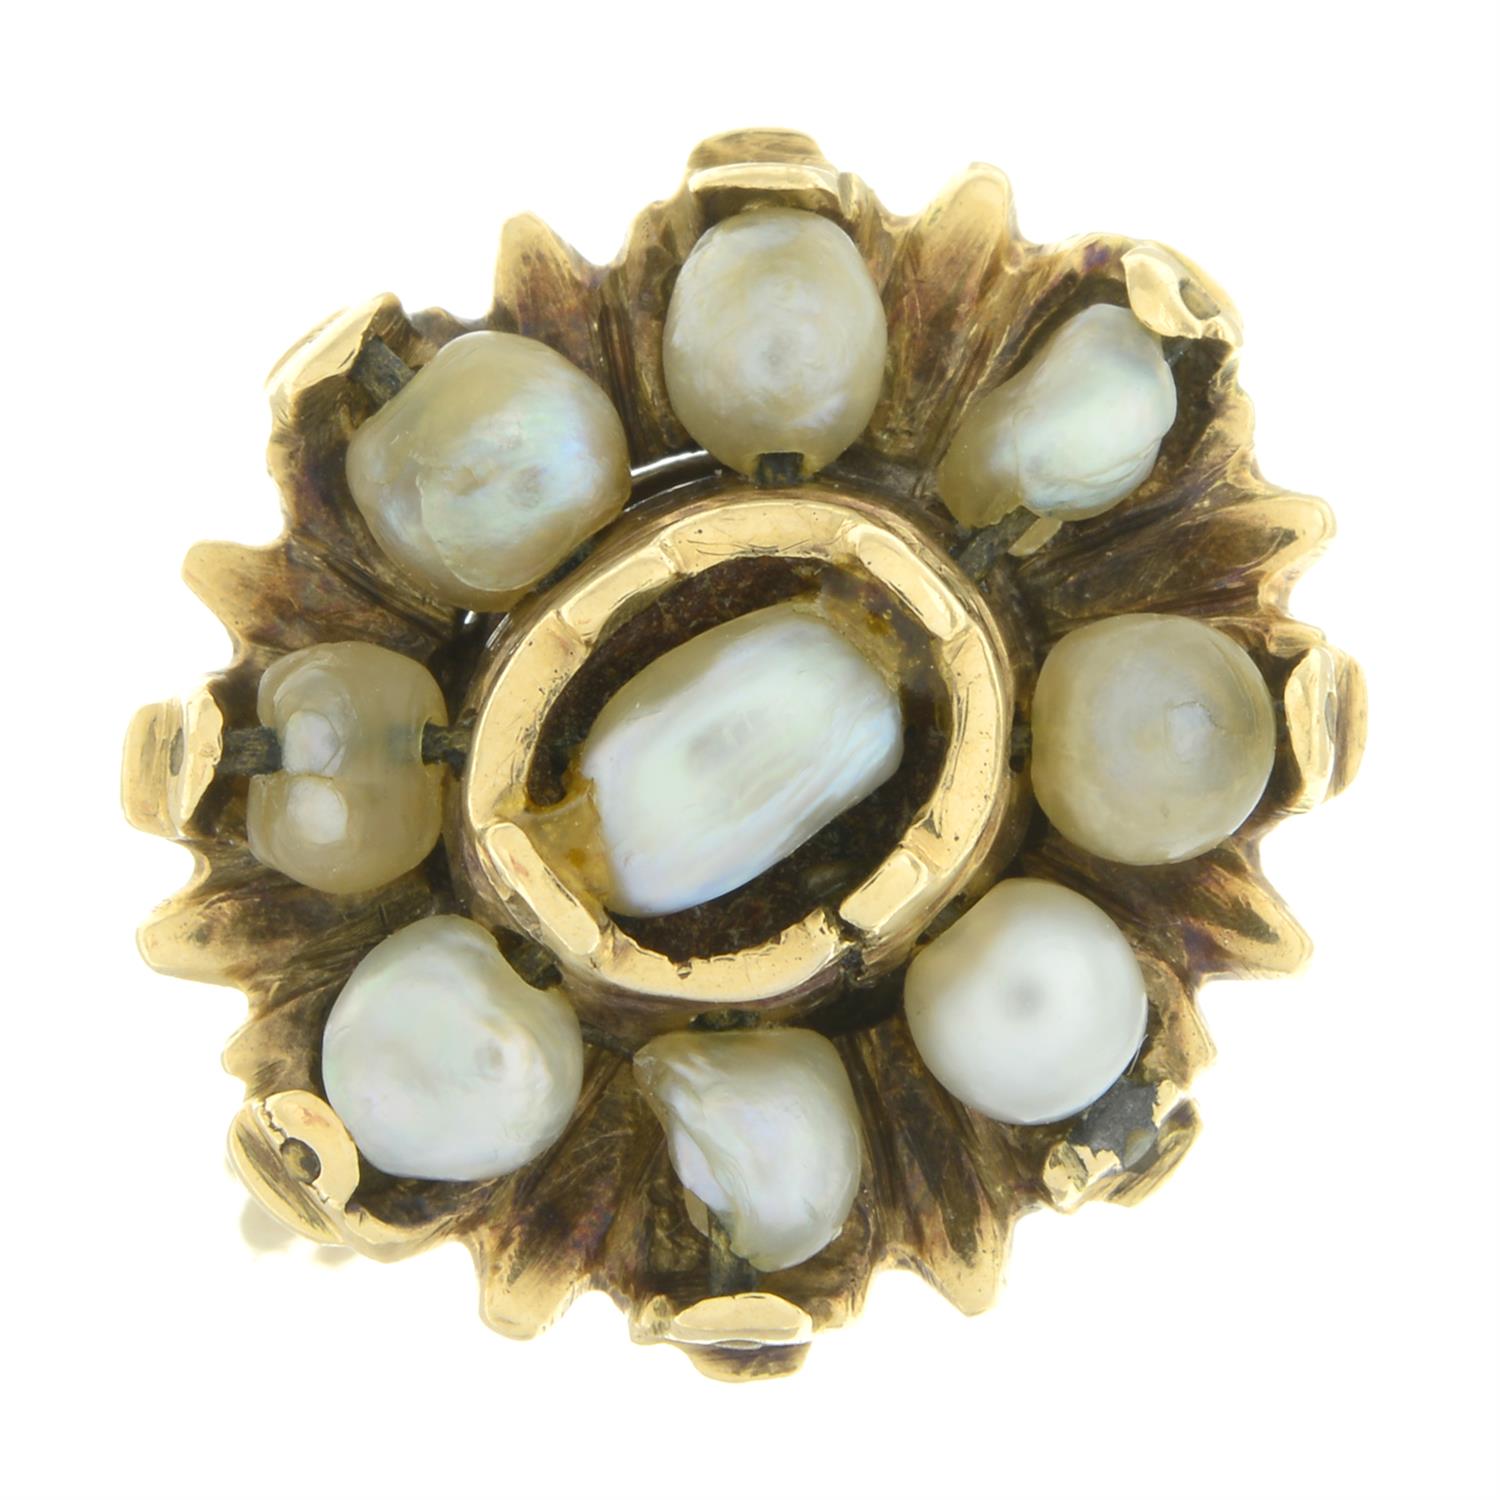 17th century gold seed pearl ring - Image 2 of 5